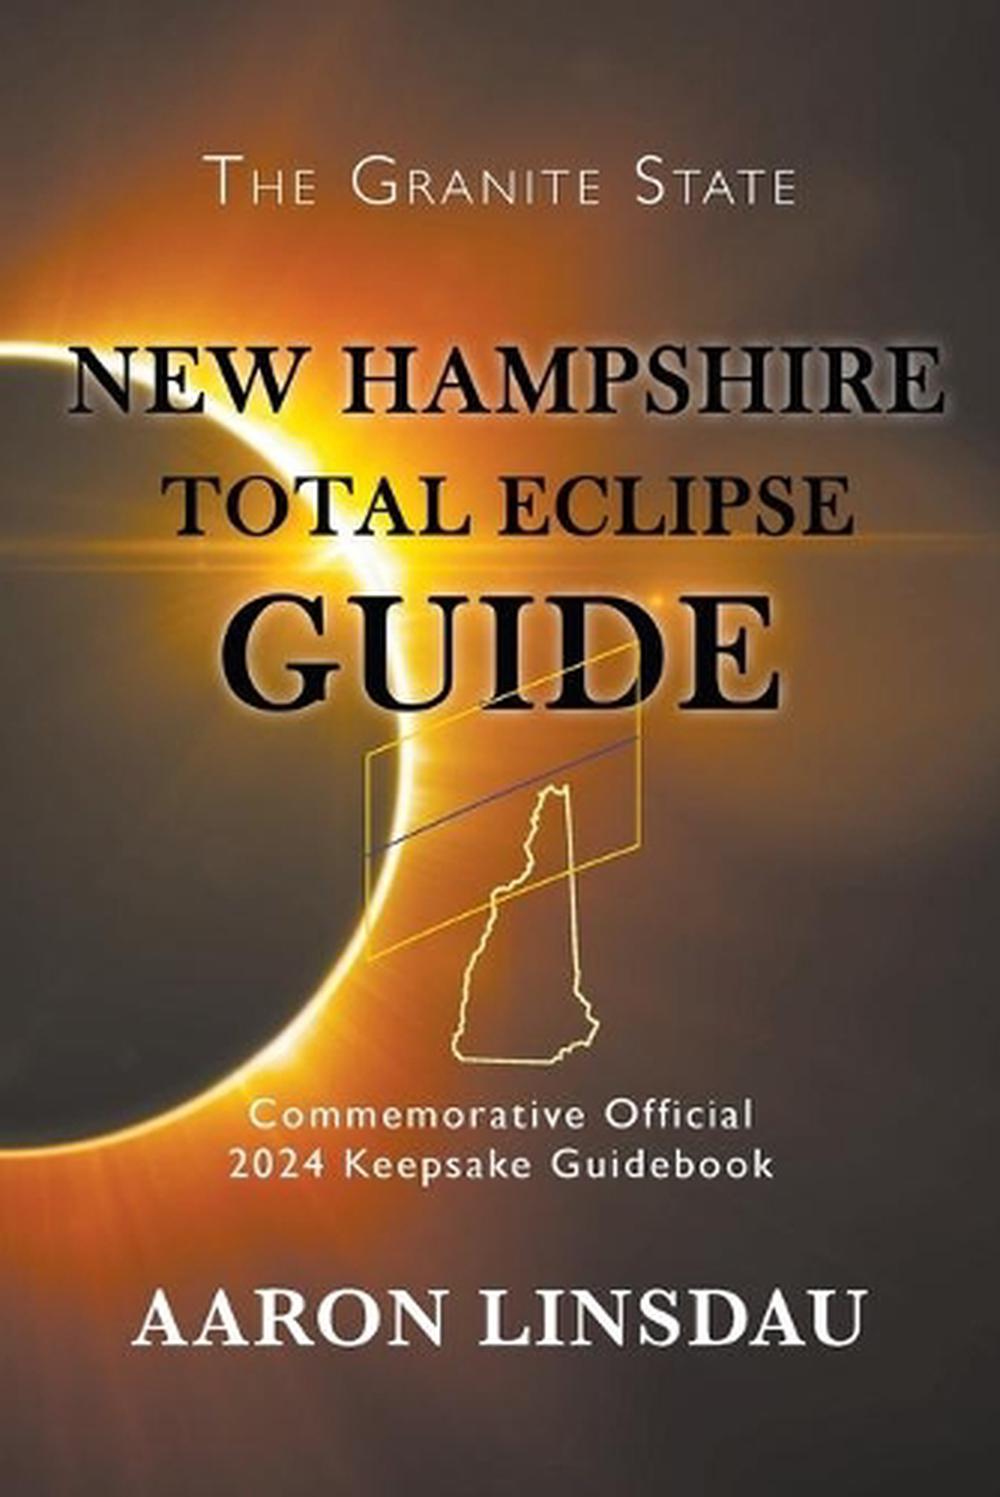 New Hampshire Total Eclipse Guide Official Commemorative 2024 Keepsake